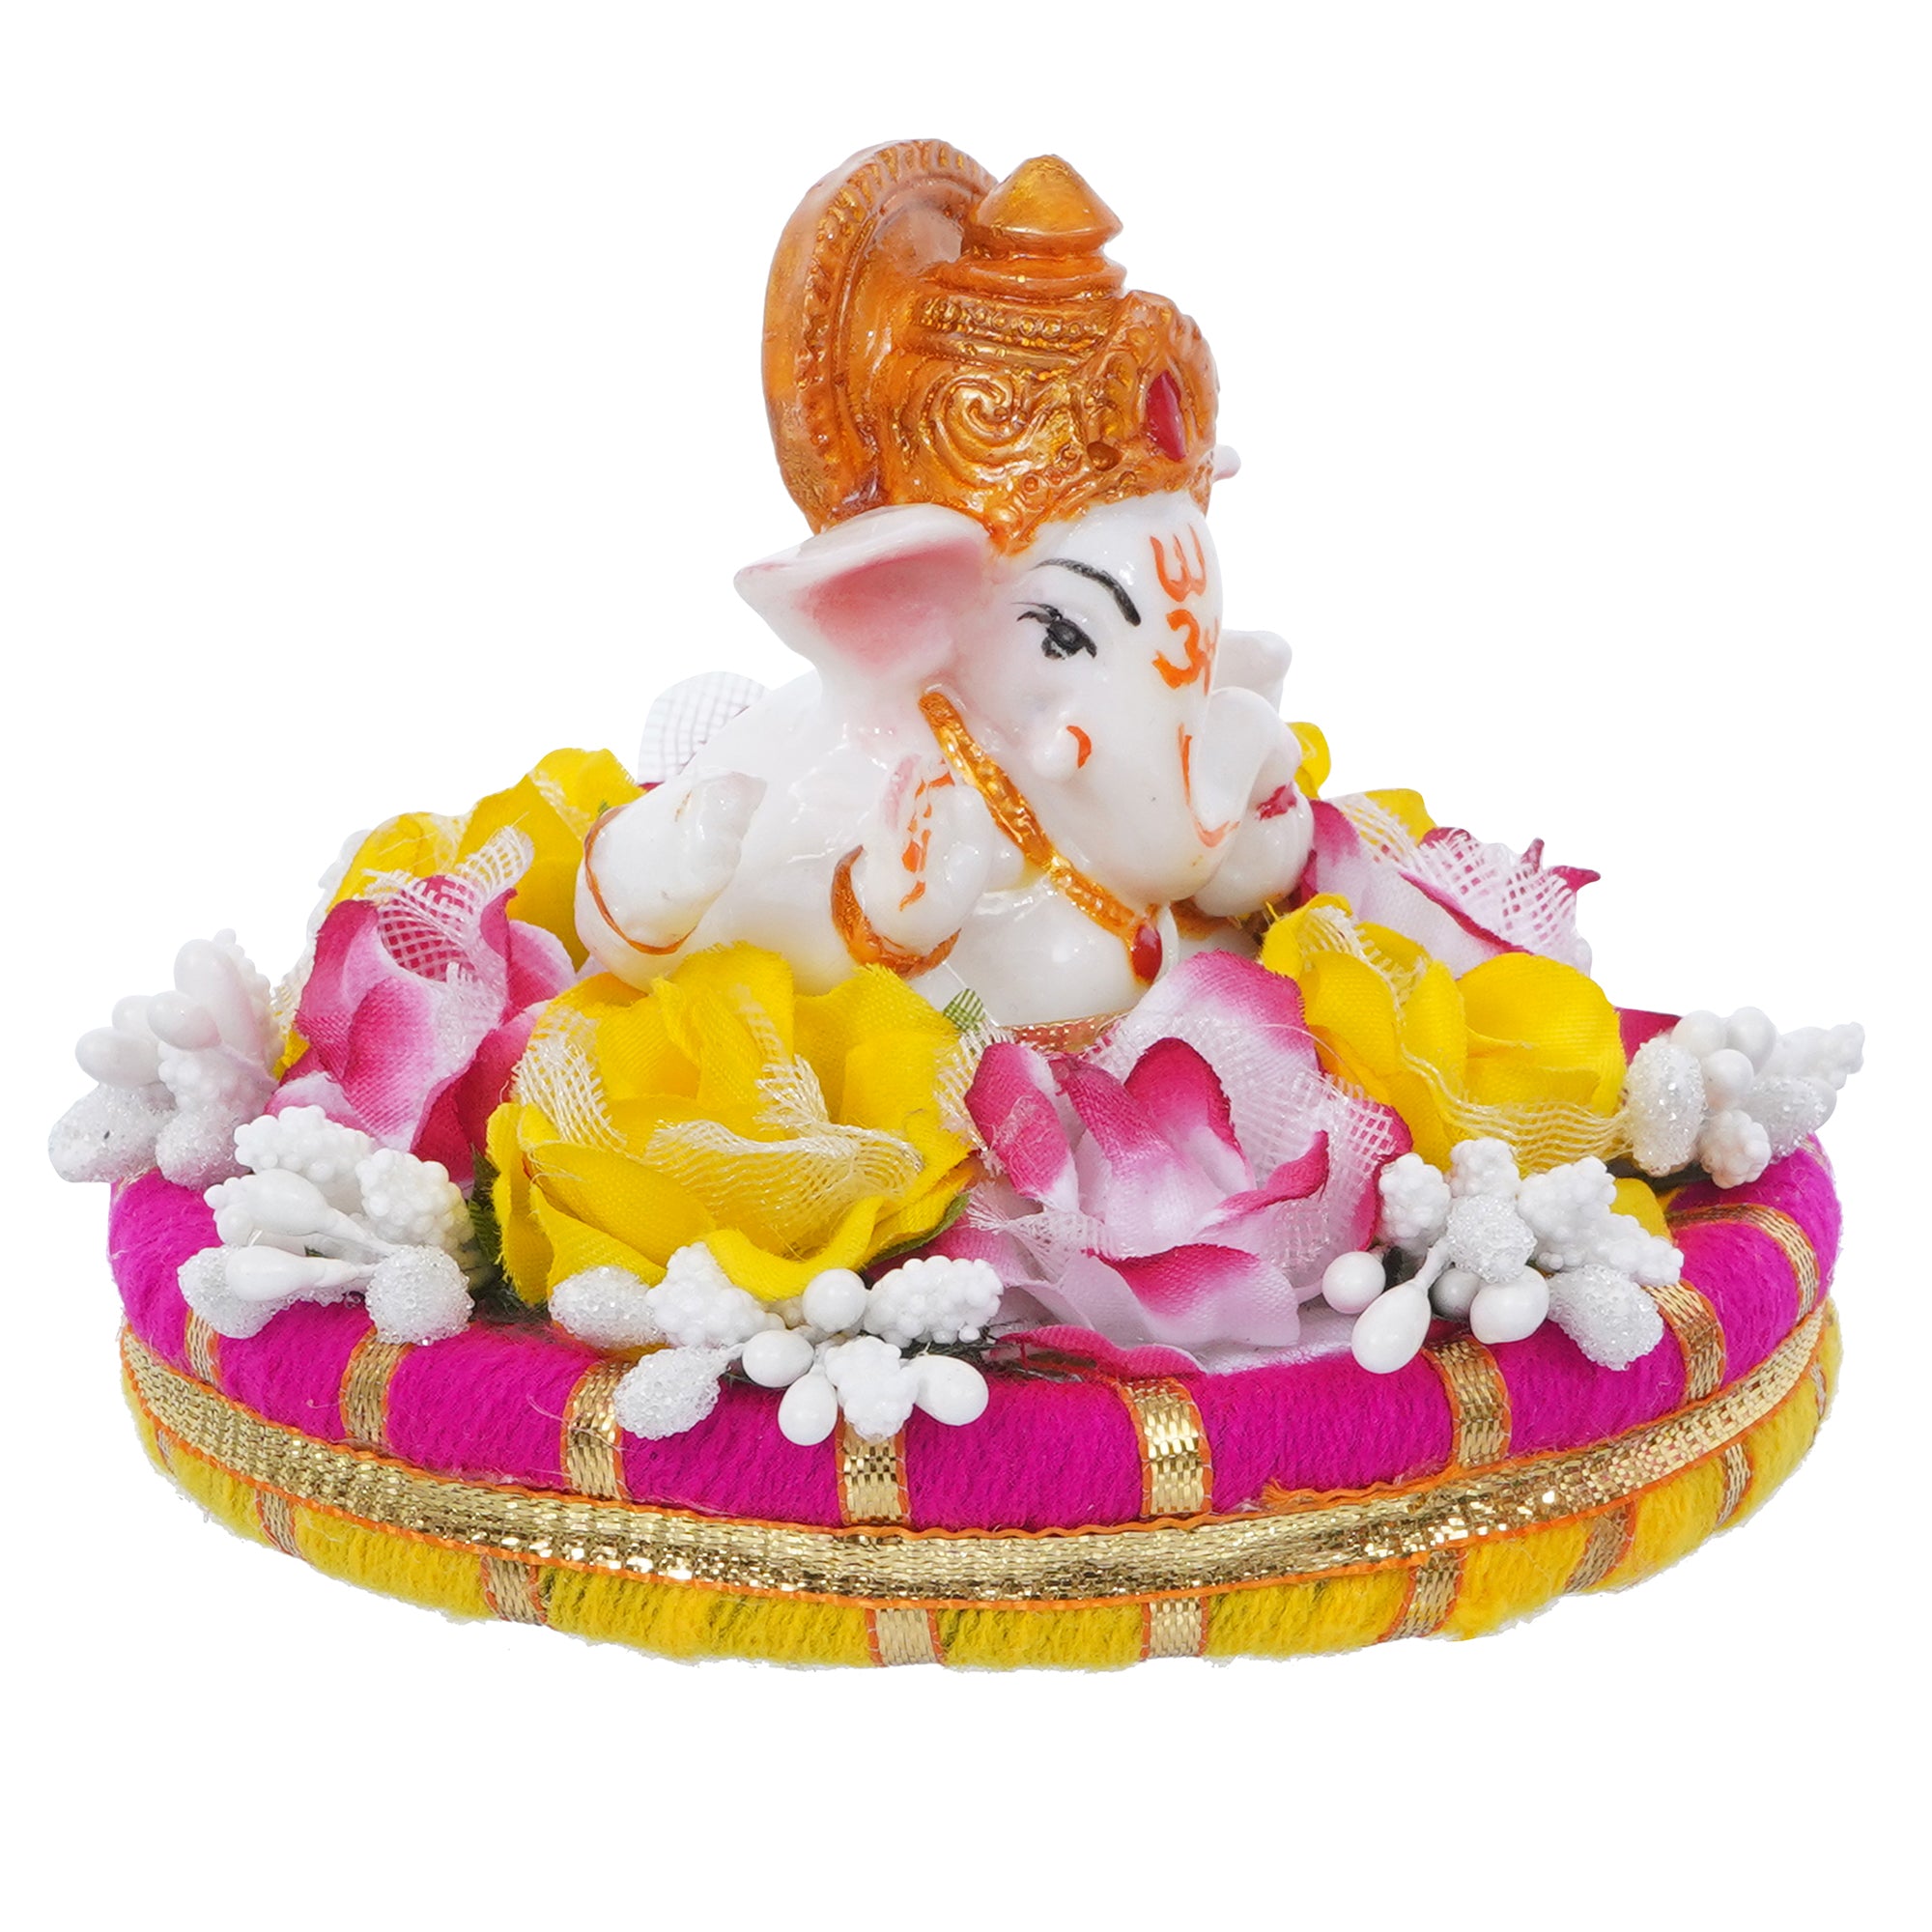 Lord Ganesha Idol On Decorative Handcrafted Colorful Flowers Plate 5